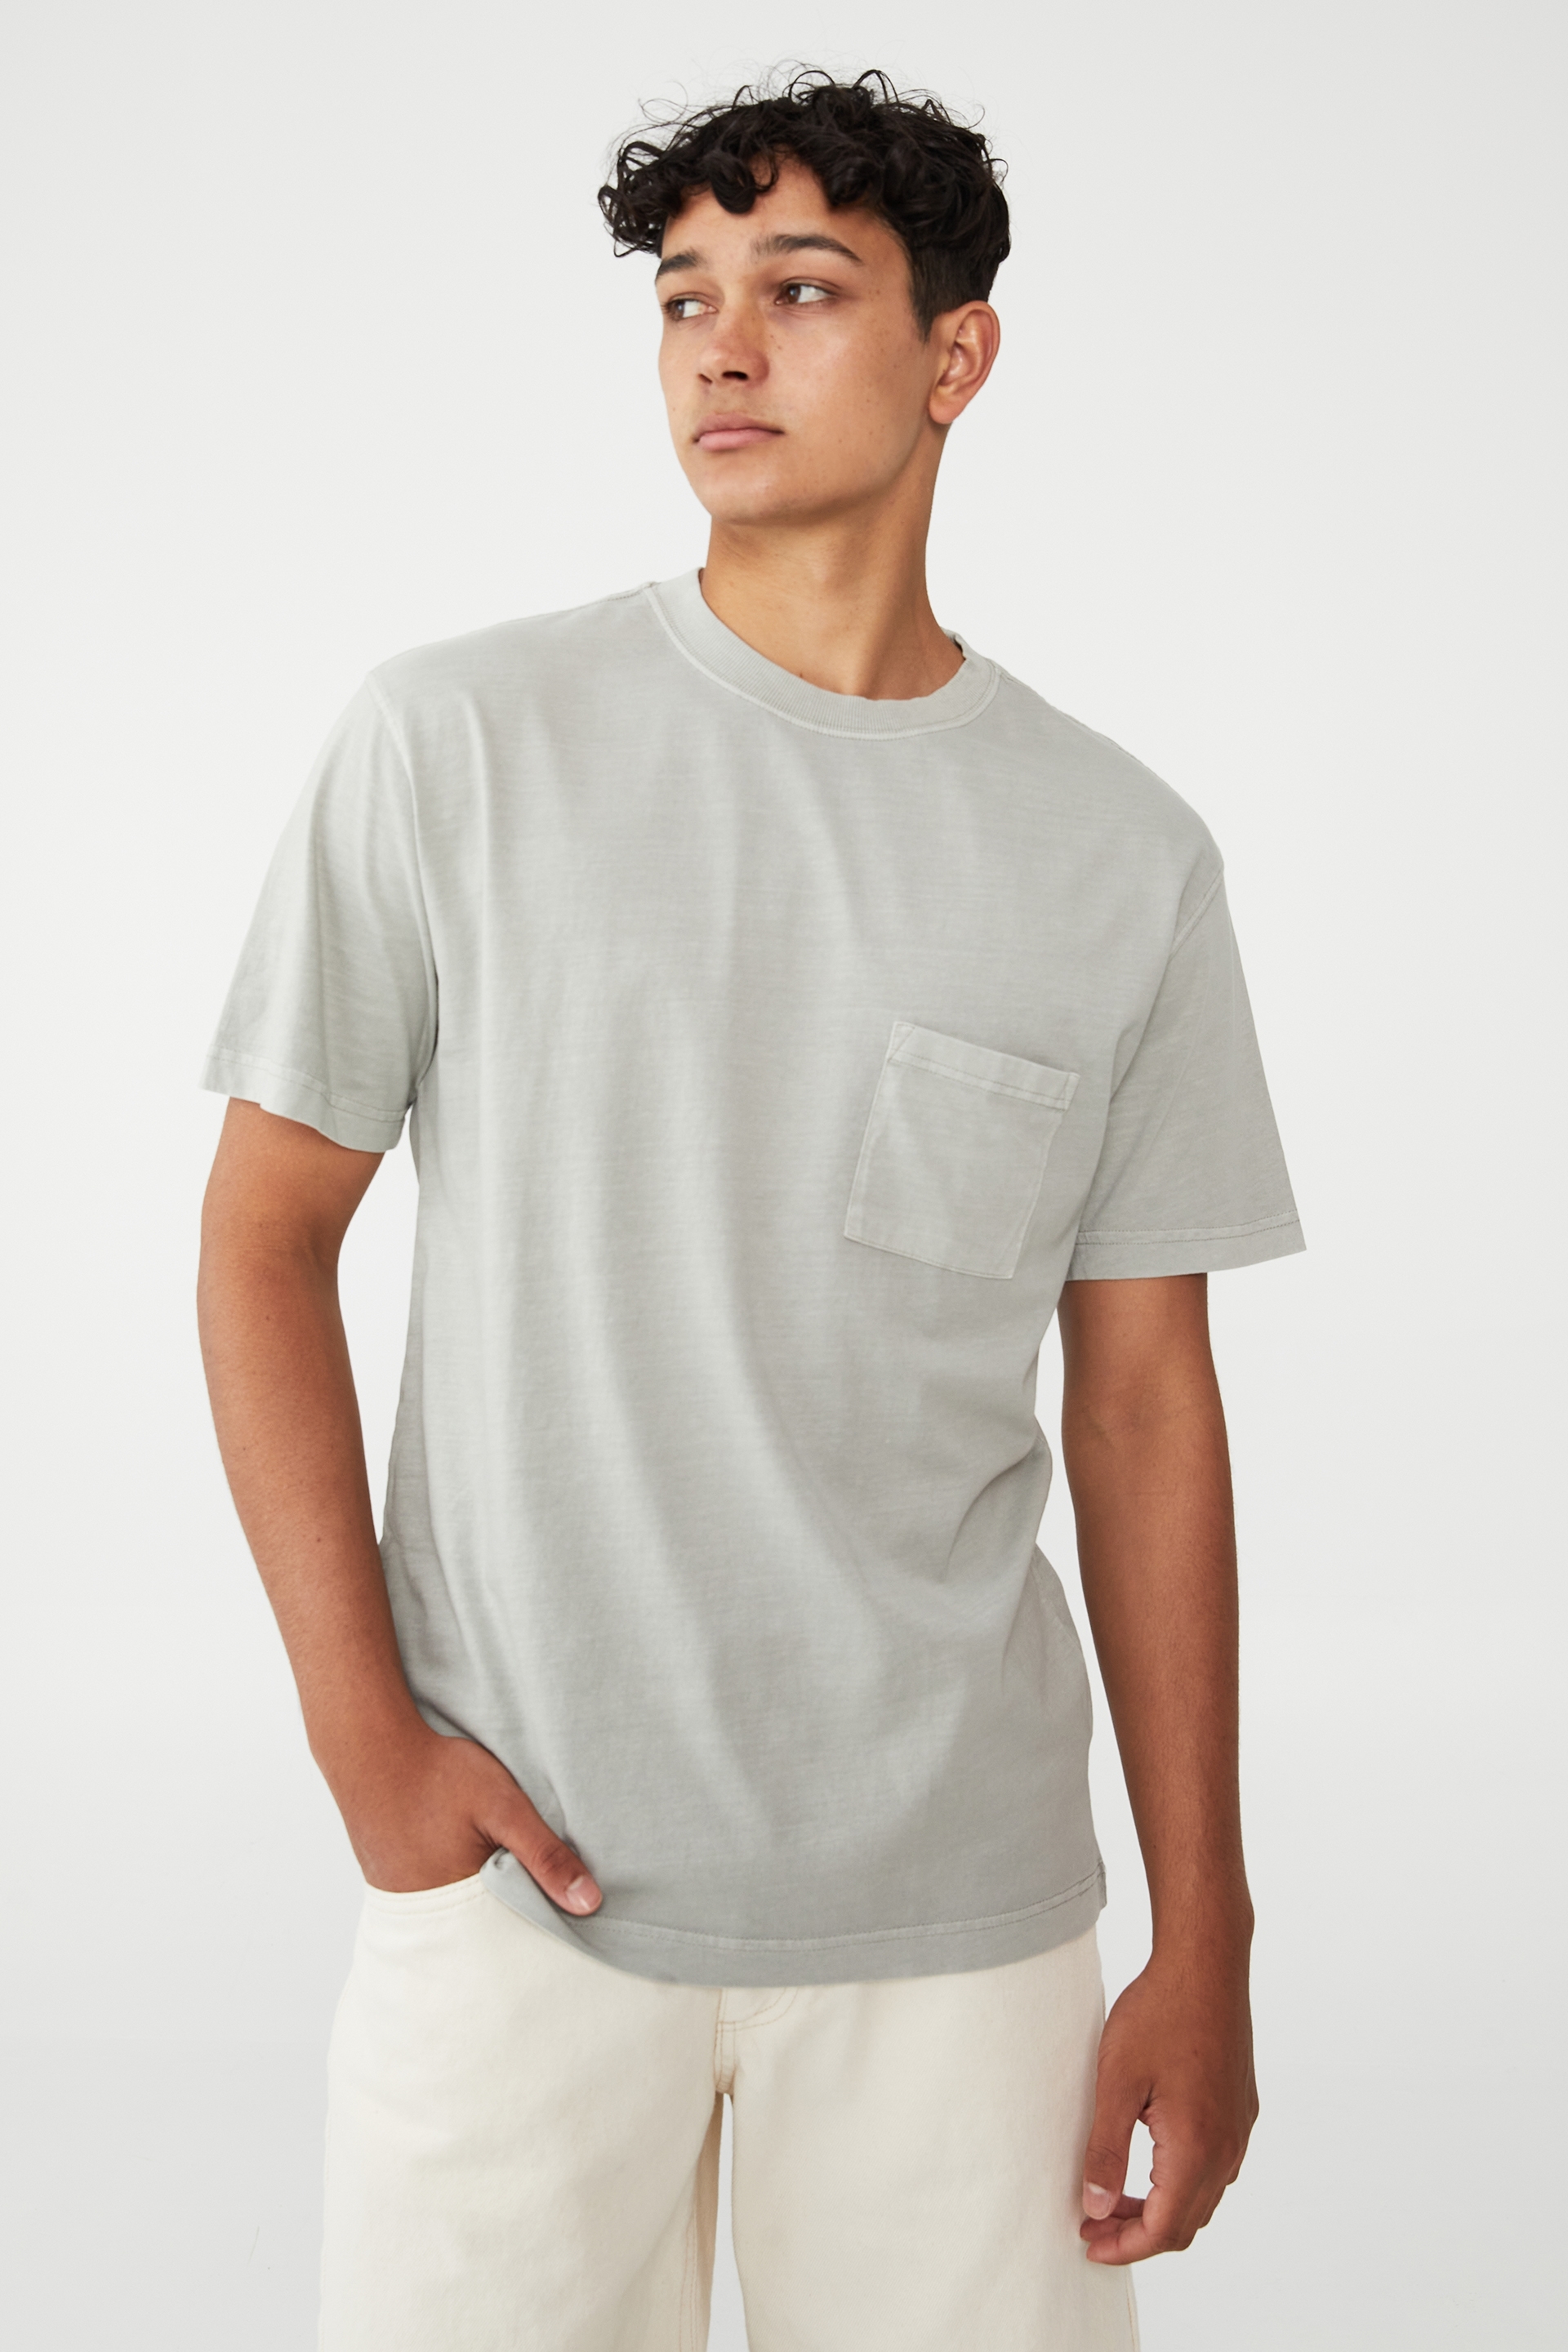 Cotton On Men - Loose Fit T-Shirt - Overcast grey